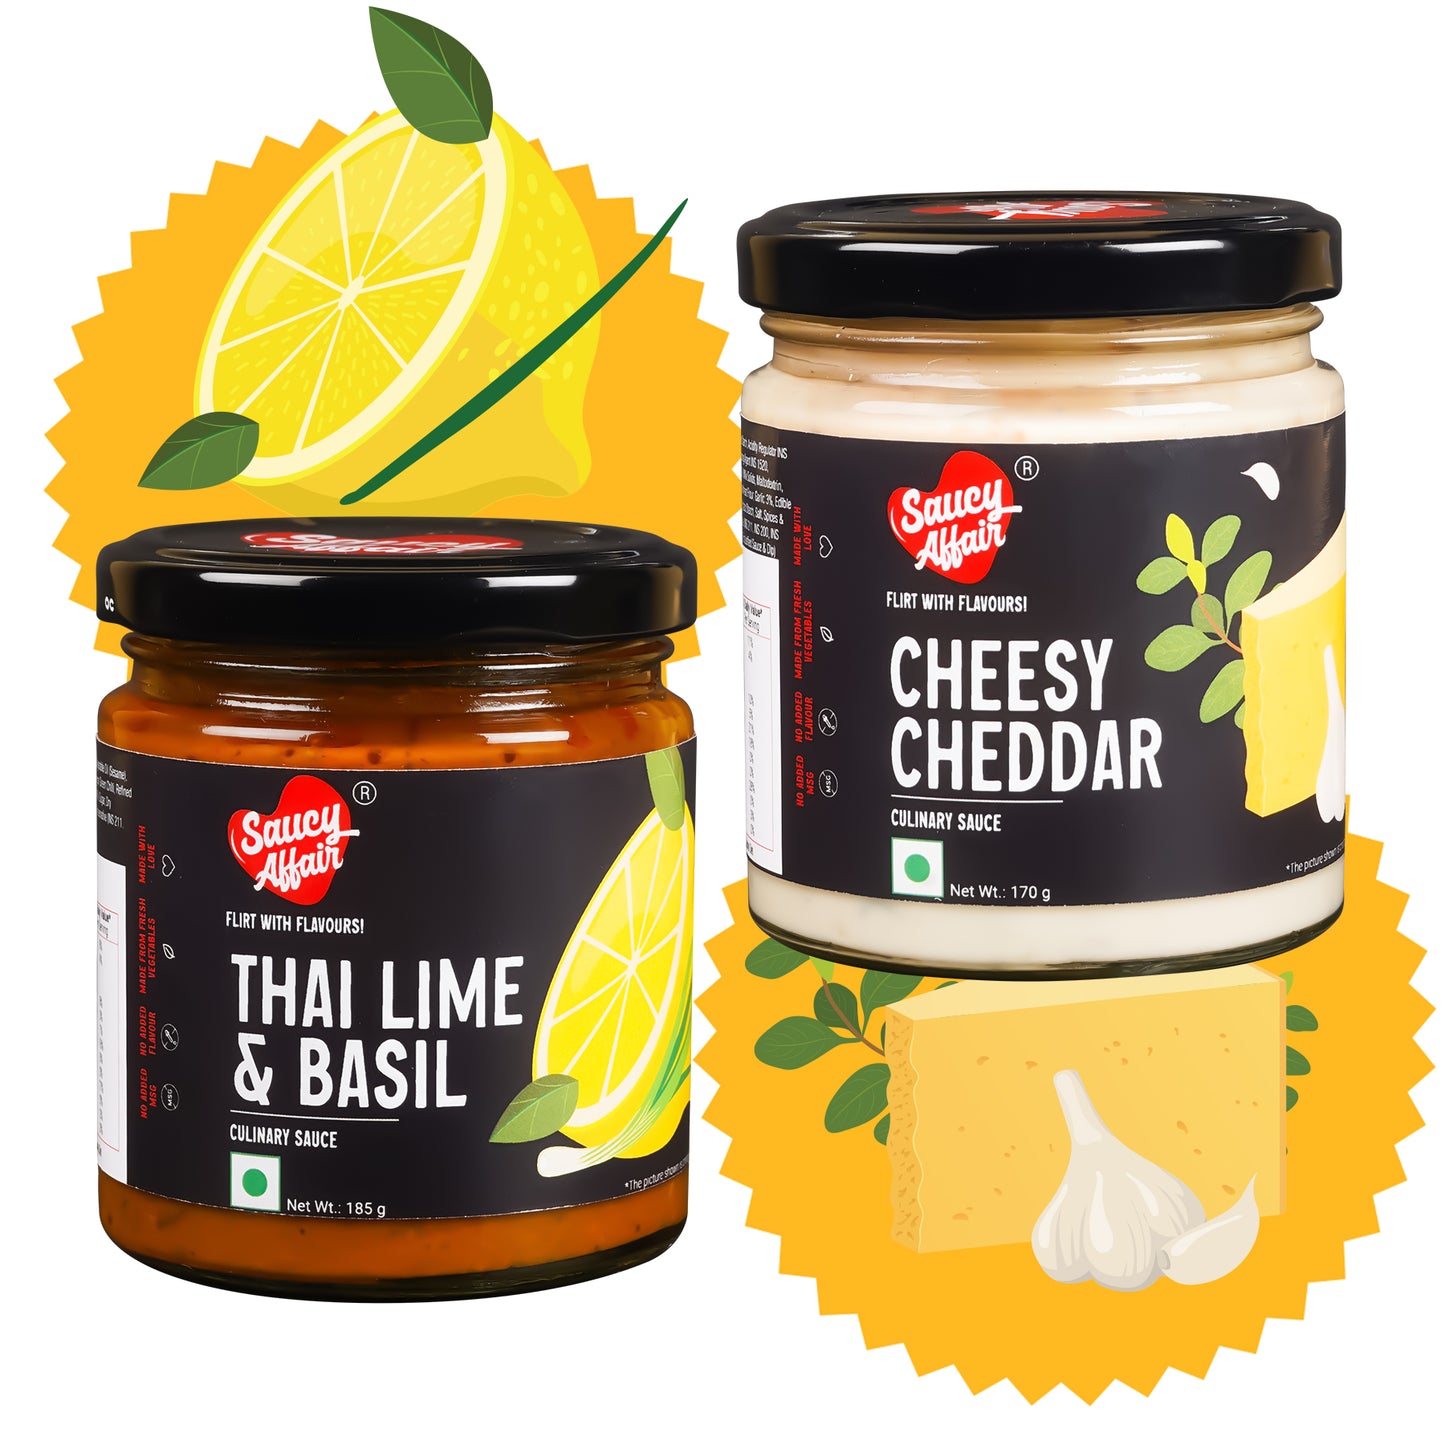 Cheesy Cheddar 170g  + Thai Lime & Basil - 180g  Combo (Pack of 2)